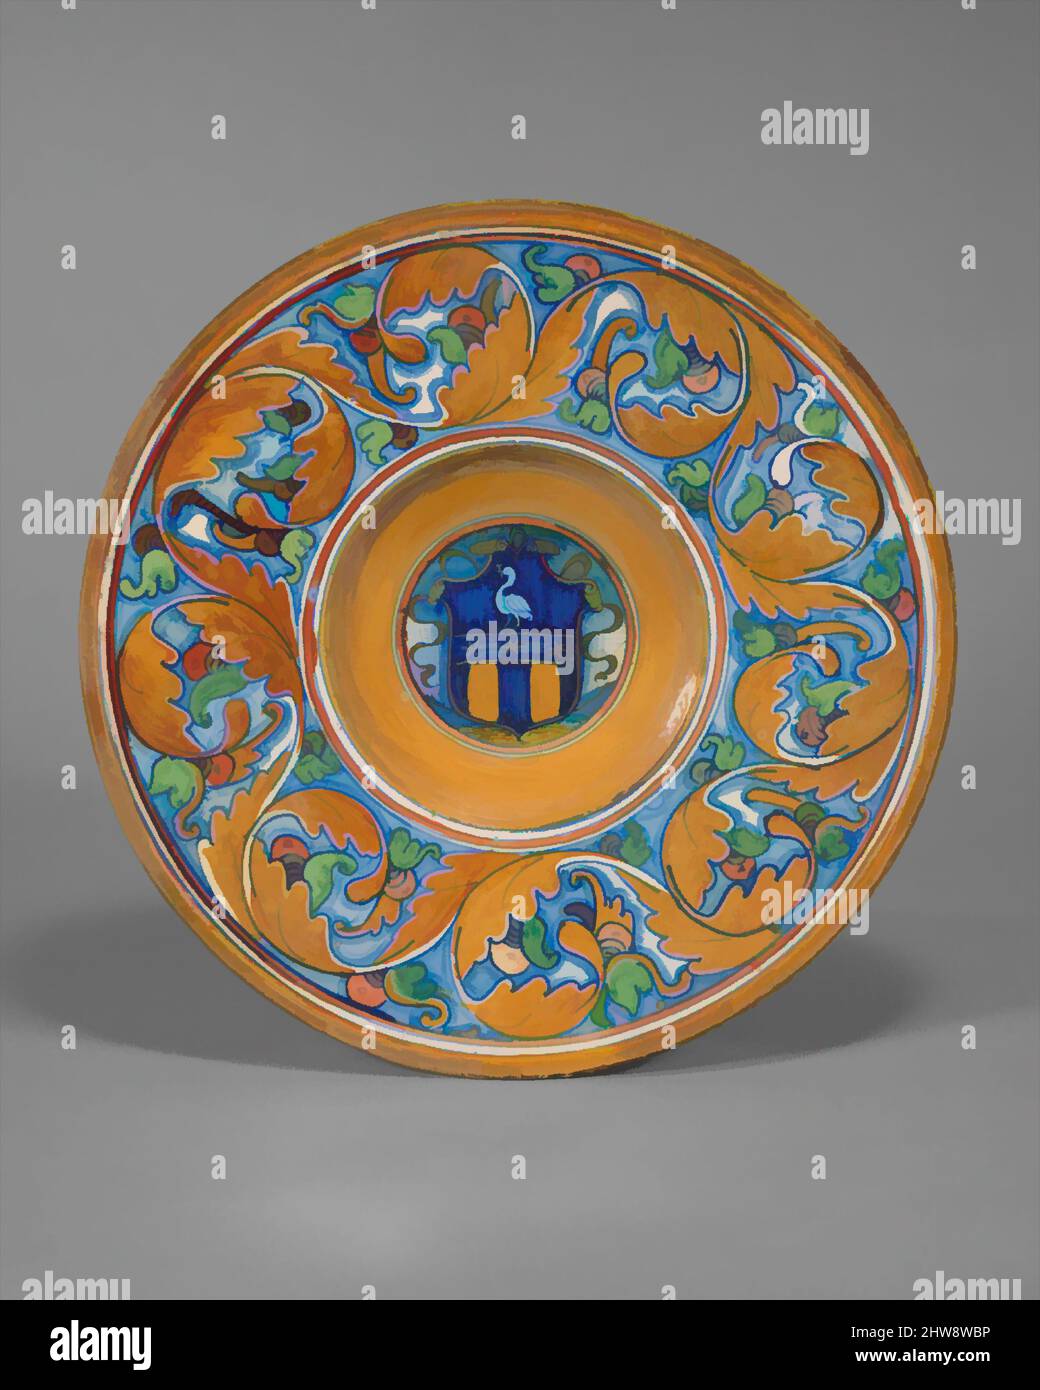 Art inspired by Plate (tondino), 1525–30, Maiolica (tin-glazed earthenware), Diameter: 10 3/4 in. (27.3 cm), Ceramics-Pottery, probably workshop of Maestro Giorgio Andreoli (Italian (Gubbio), active first half of 16th century, Classic works modernized by Artotop with a splash of modernity. Shapes, color and value, eye-catching visual impact on art. Emotions through freedom of artworks in a contemporary way. A timeless message pursuing a wildly creative new direction. Artists turning to the digital medium and creating the Artotop NFT Stock Photo